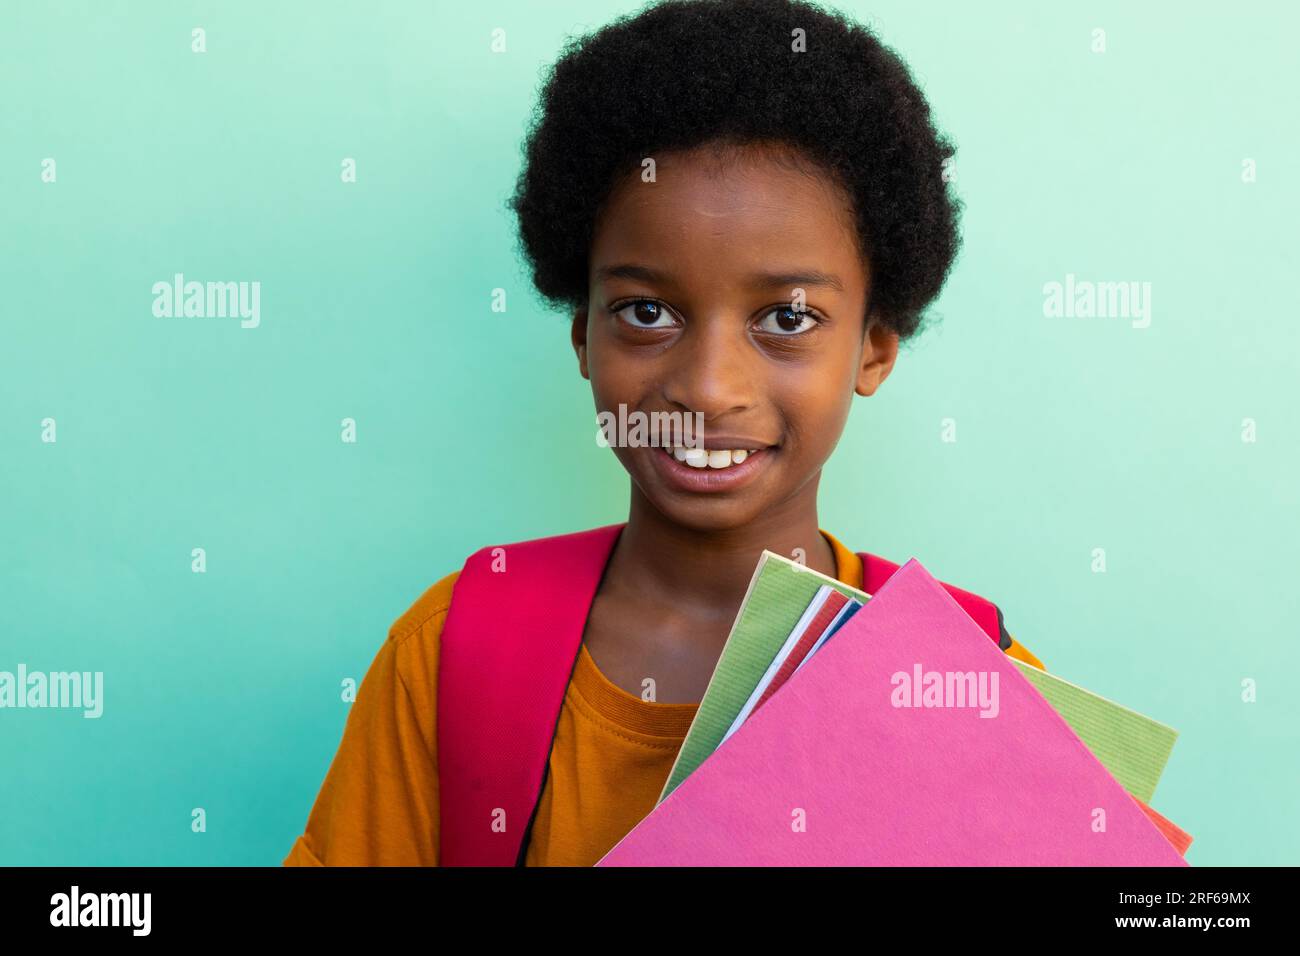 Portrait of happy biracial schoolboy with books wearing yellow tshirt over blue background Stock Photo